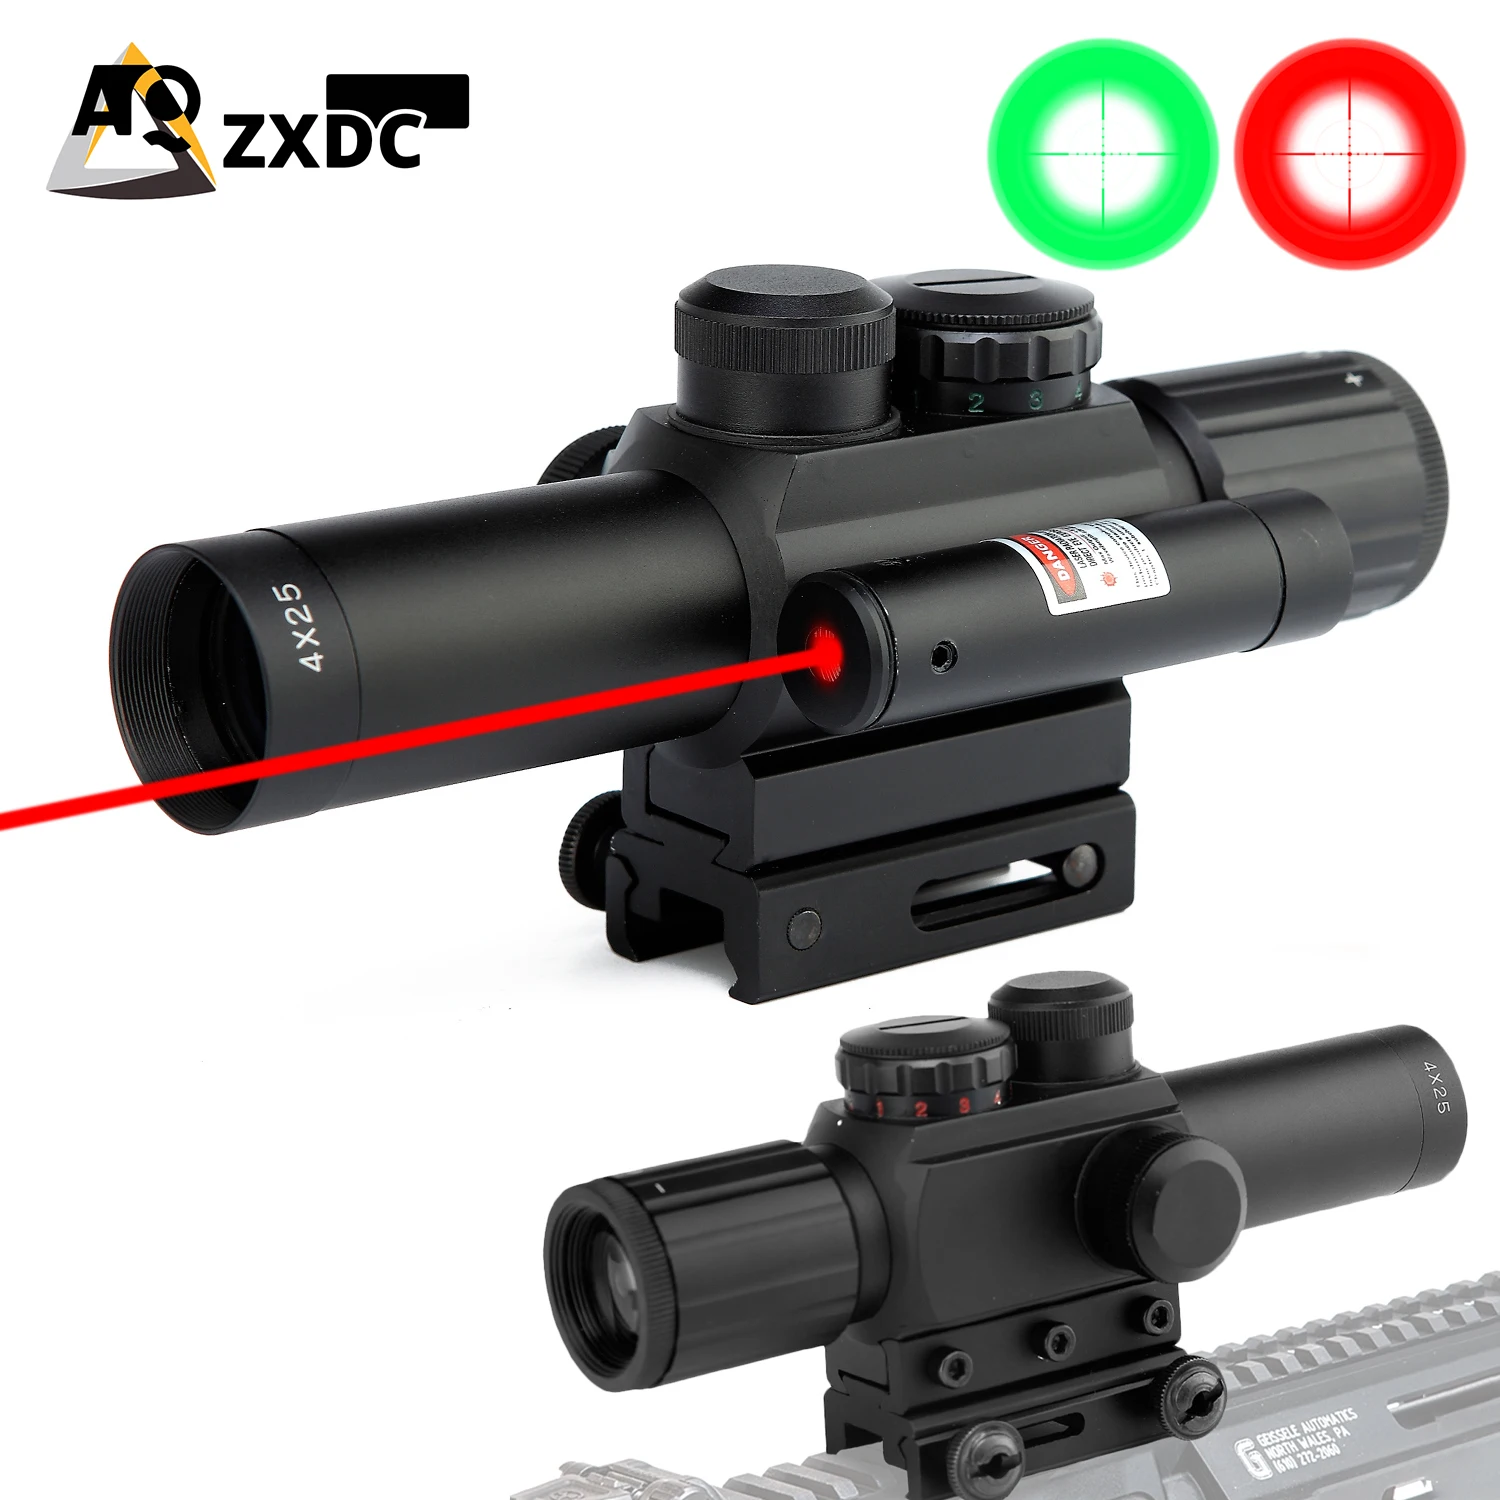 4x25-m6-laser-sight-4x-magnifying-glass-telescope-airsoft-hunting-scope-adjustable-and-detachable-for-22cm-rail